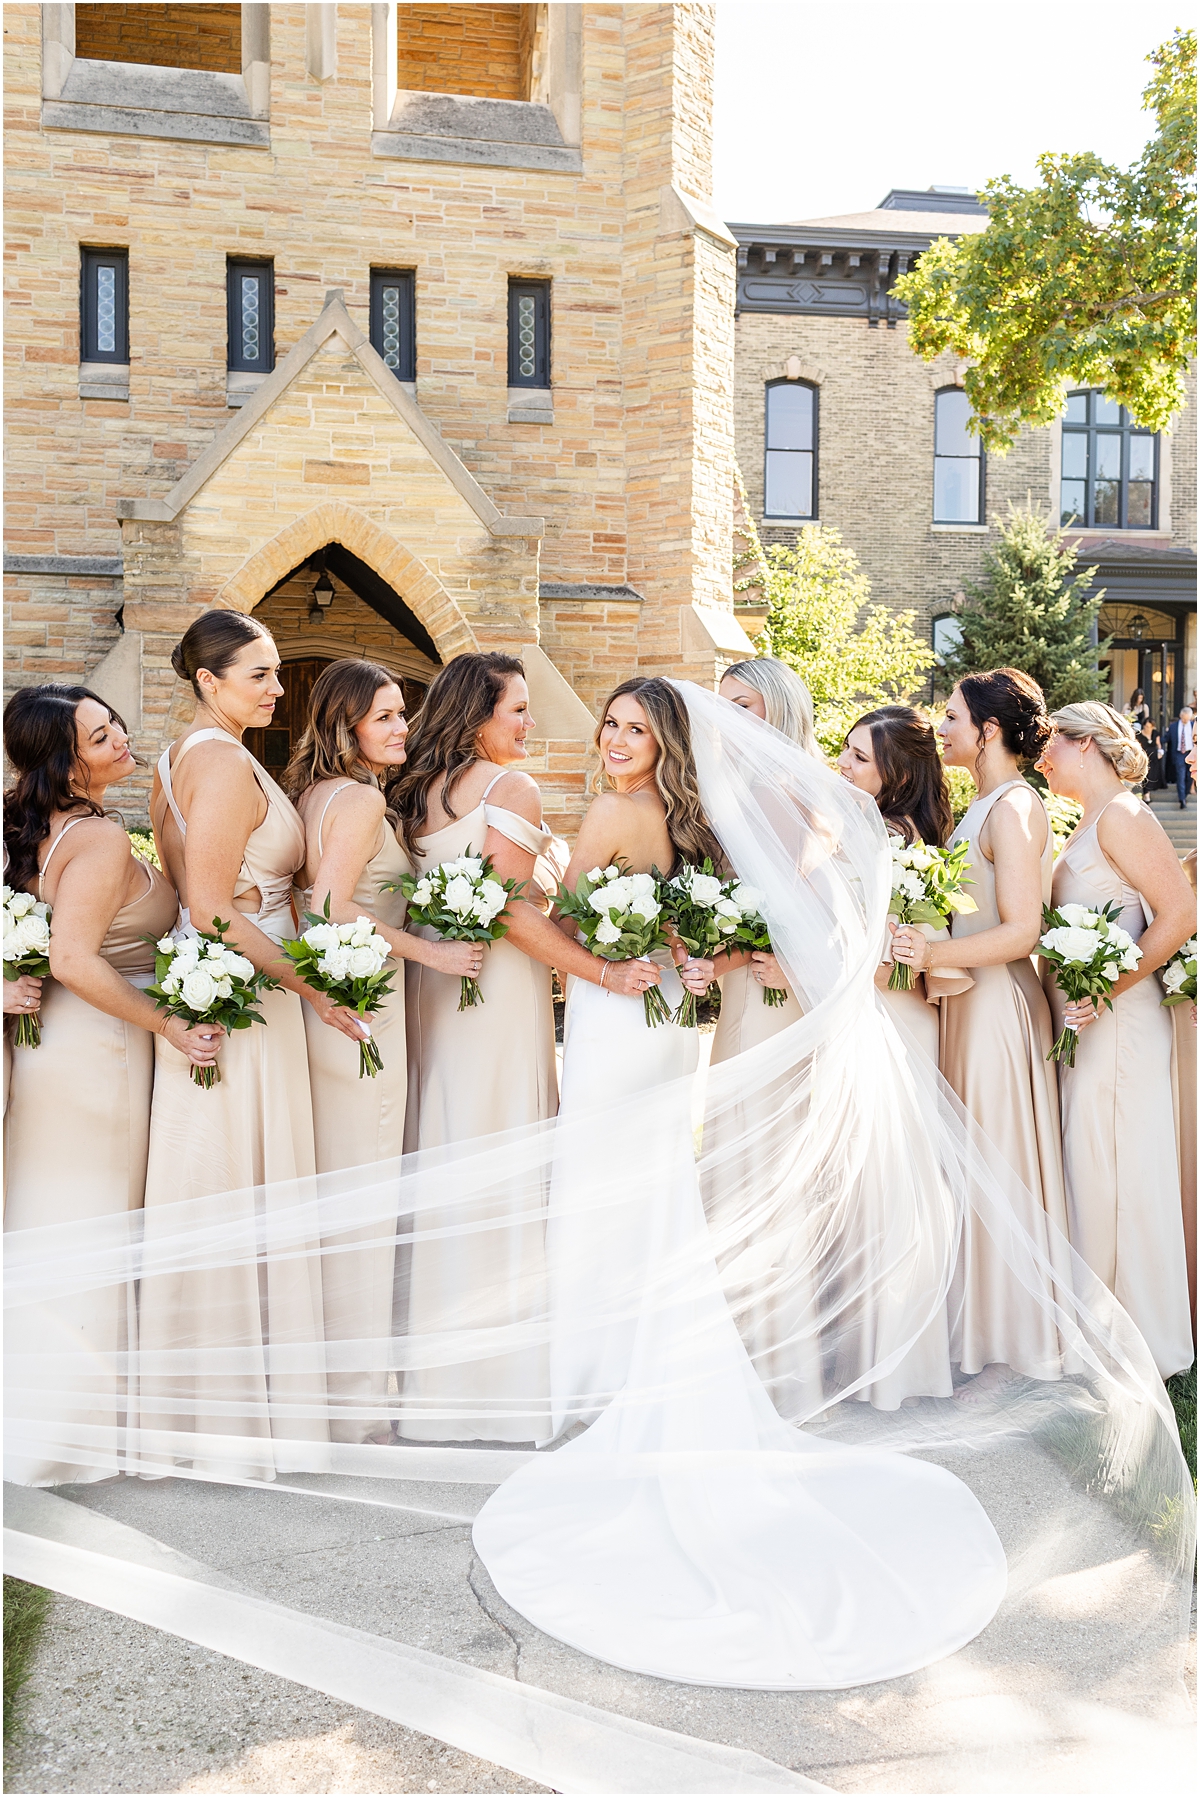 bride and bridesmaids in champagne colored bridesmaids dresses